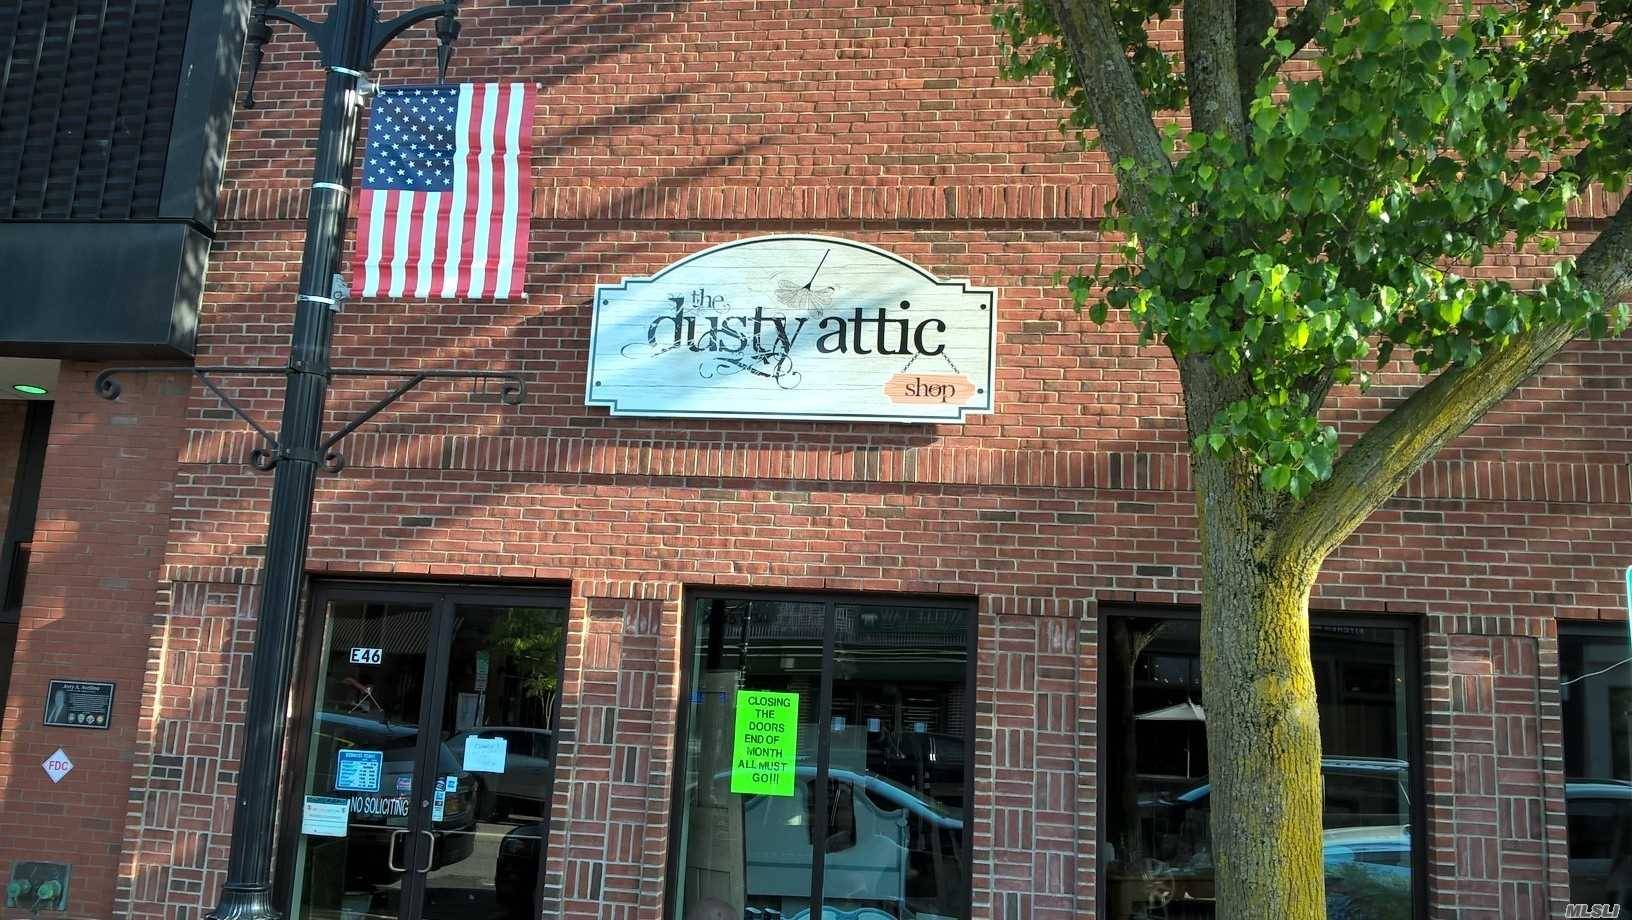 Store Front Right On E Main St Next To Library And Toast Currently The Dusty Attic With Municipal Parking Lot In Back, Renovated 3 Years Ago.